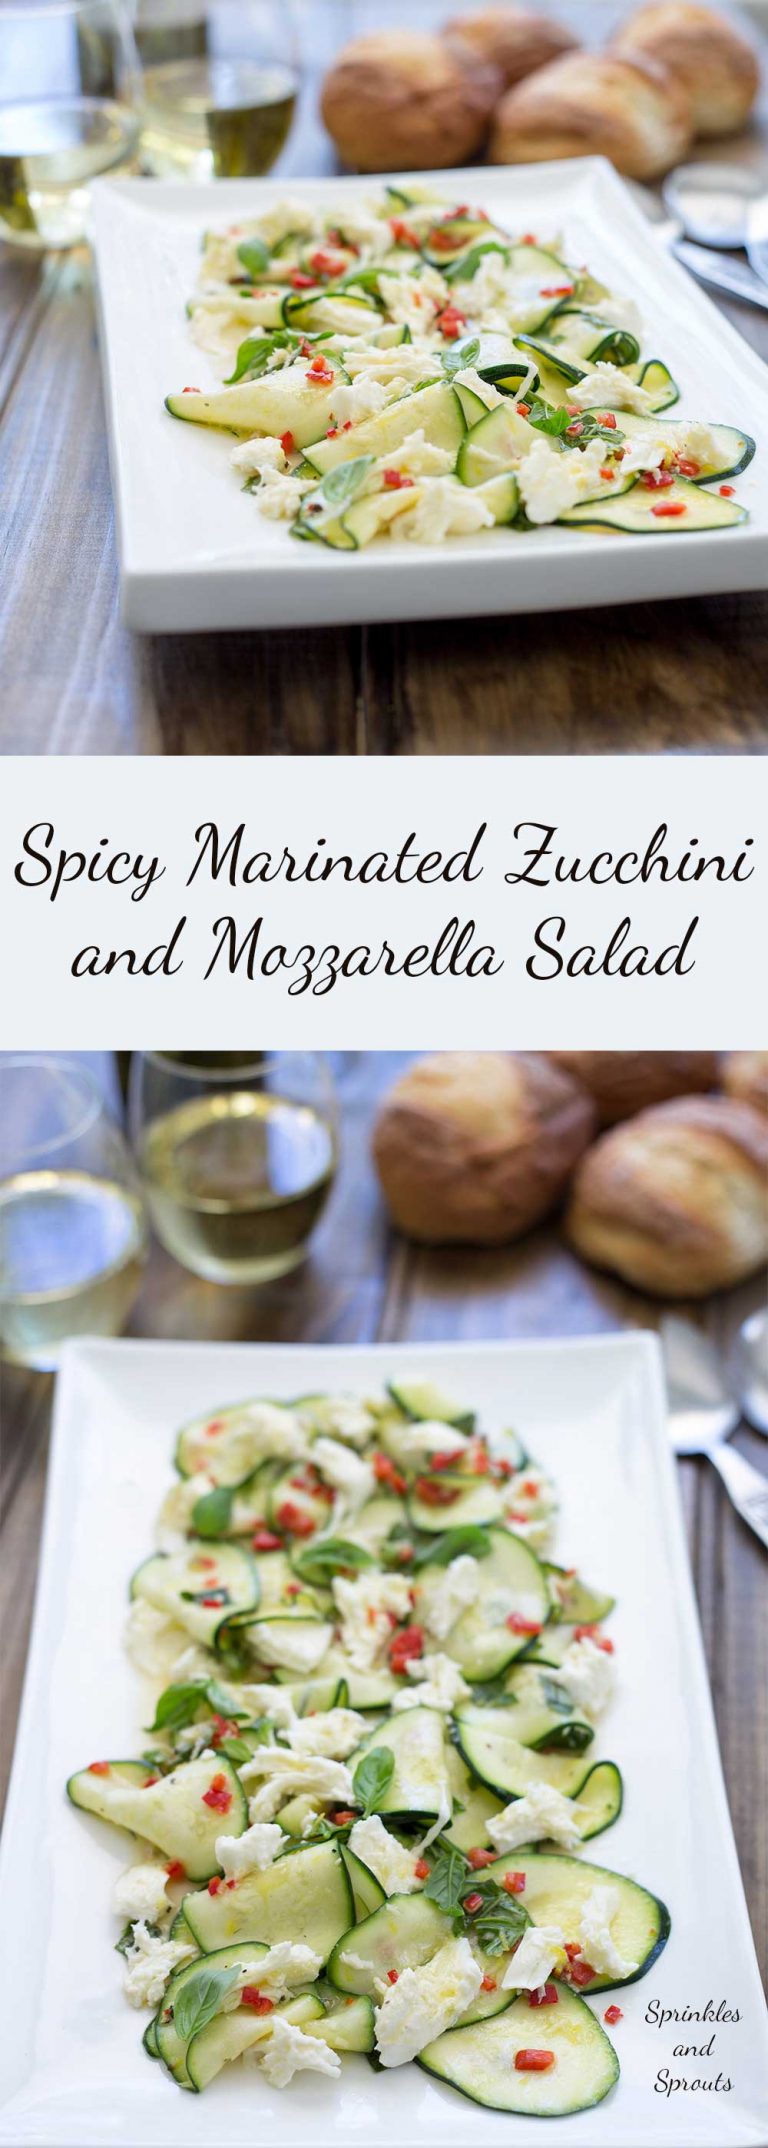 Mozzarella and Spicy Marinated Zucchini Salad | Sprinkles and Sprouts